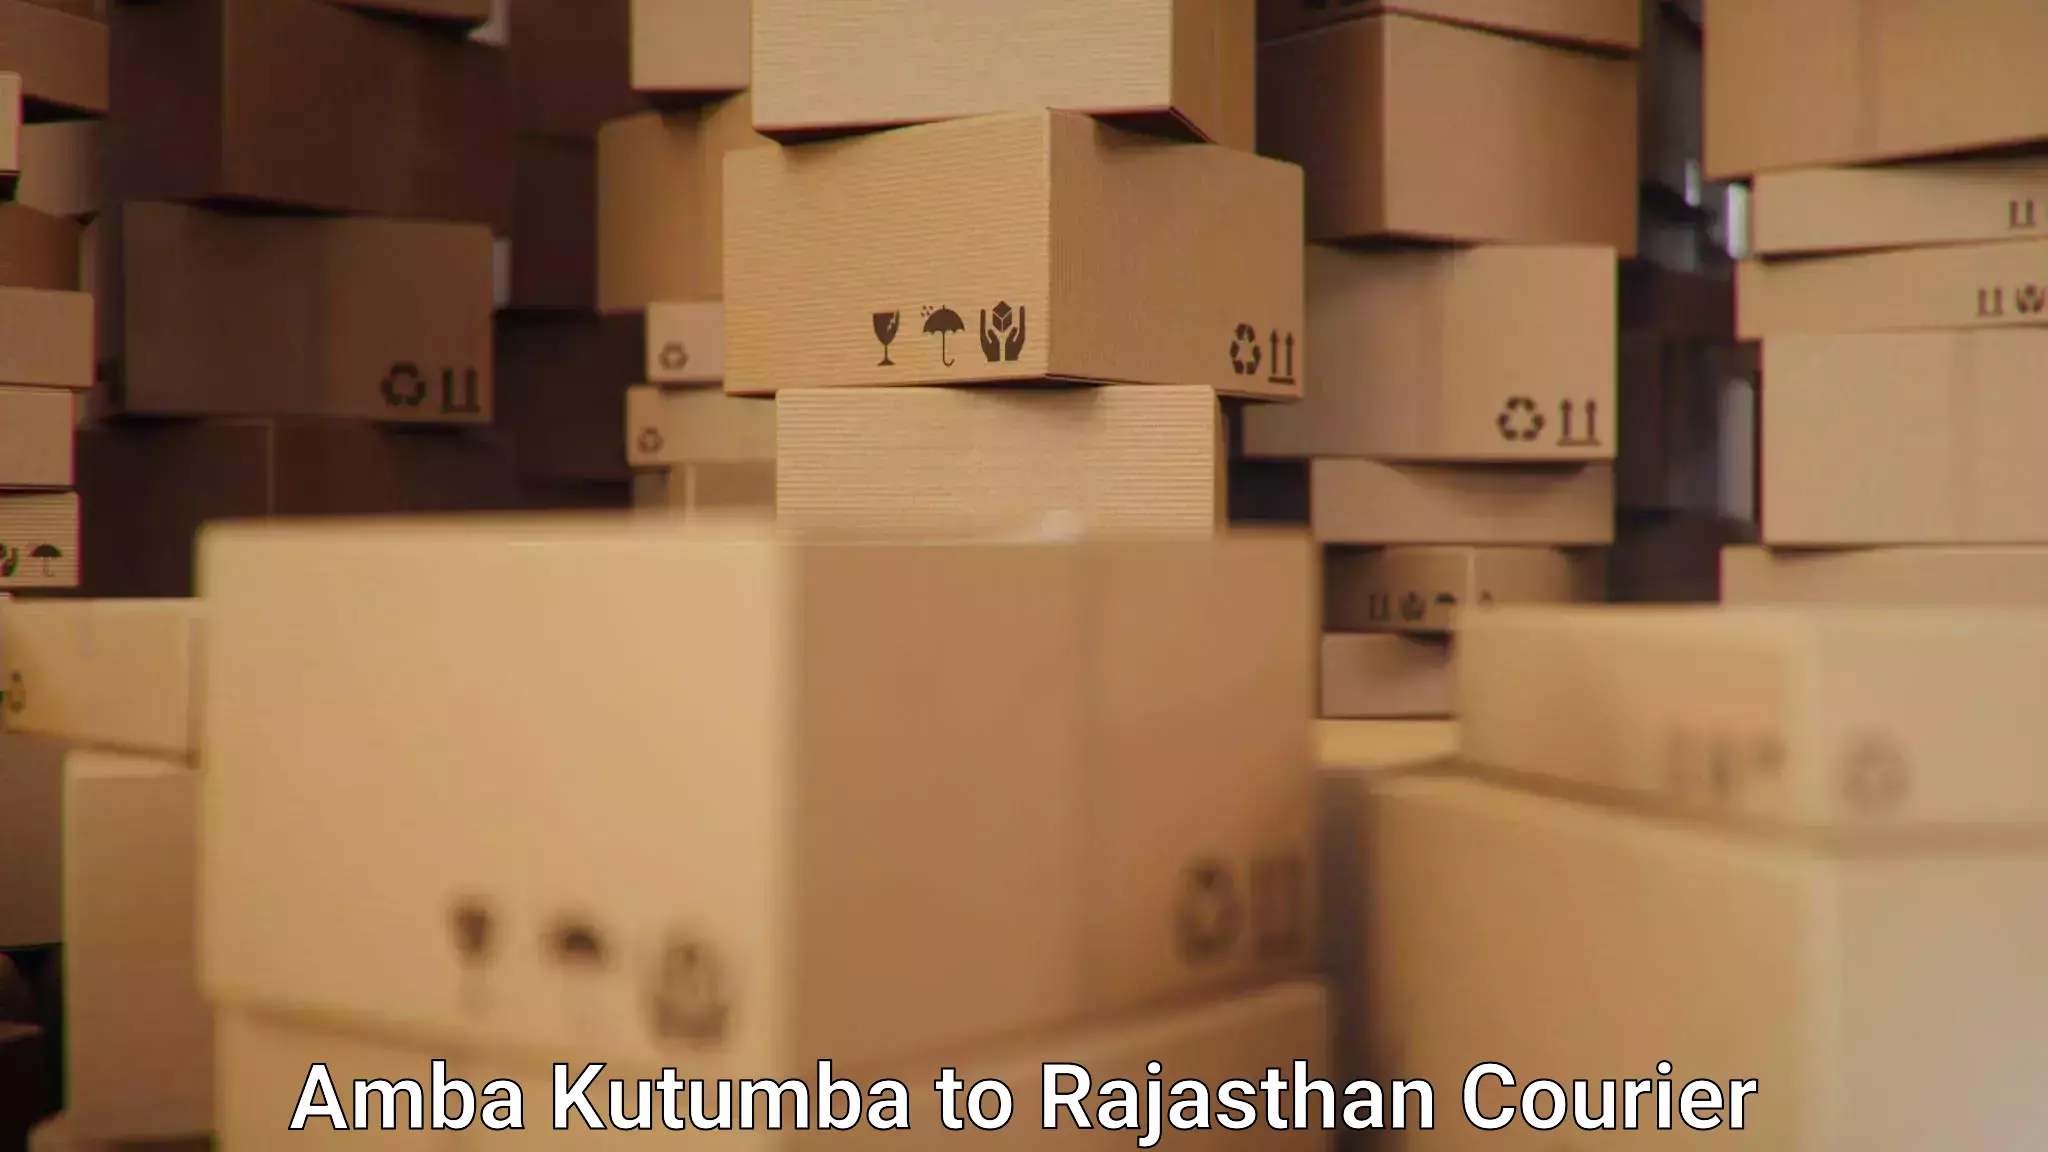 24-hour courier services Amba Kutumba to Yeswanthapur